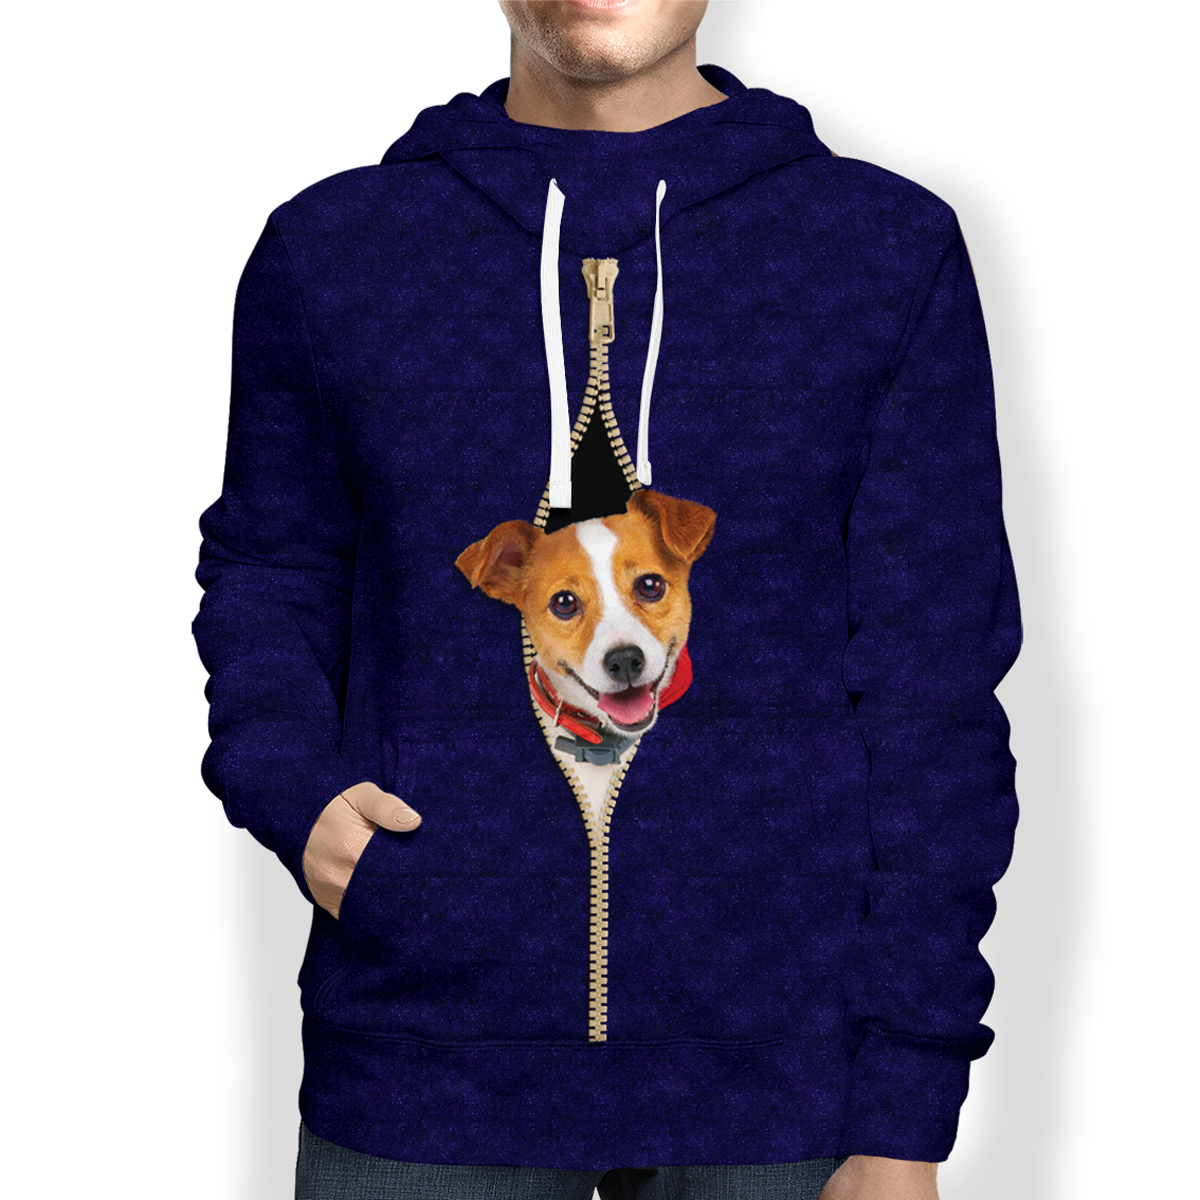 Hoodie With Your Pet's Photo - 7